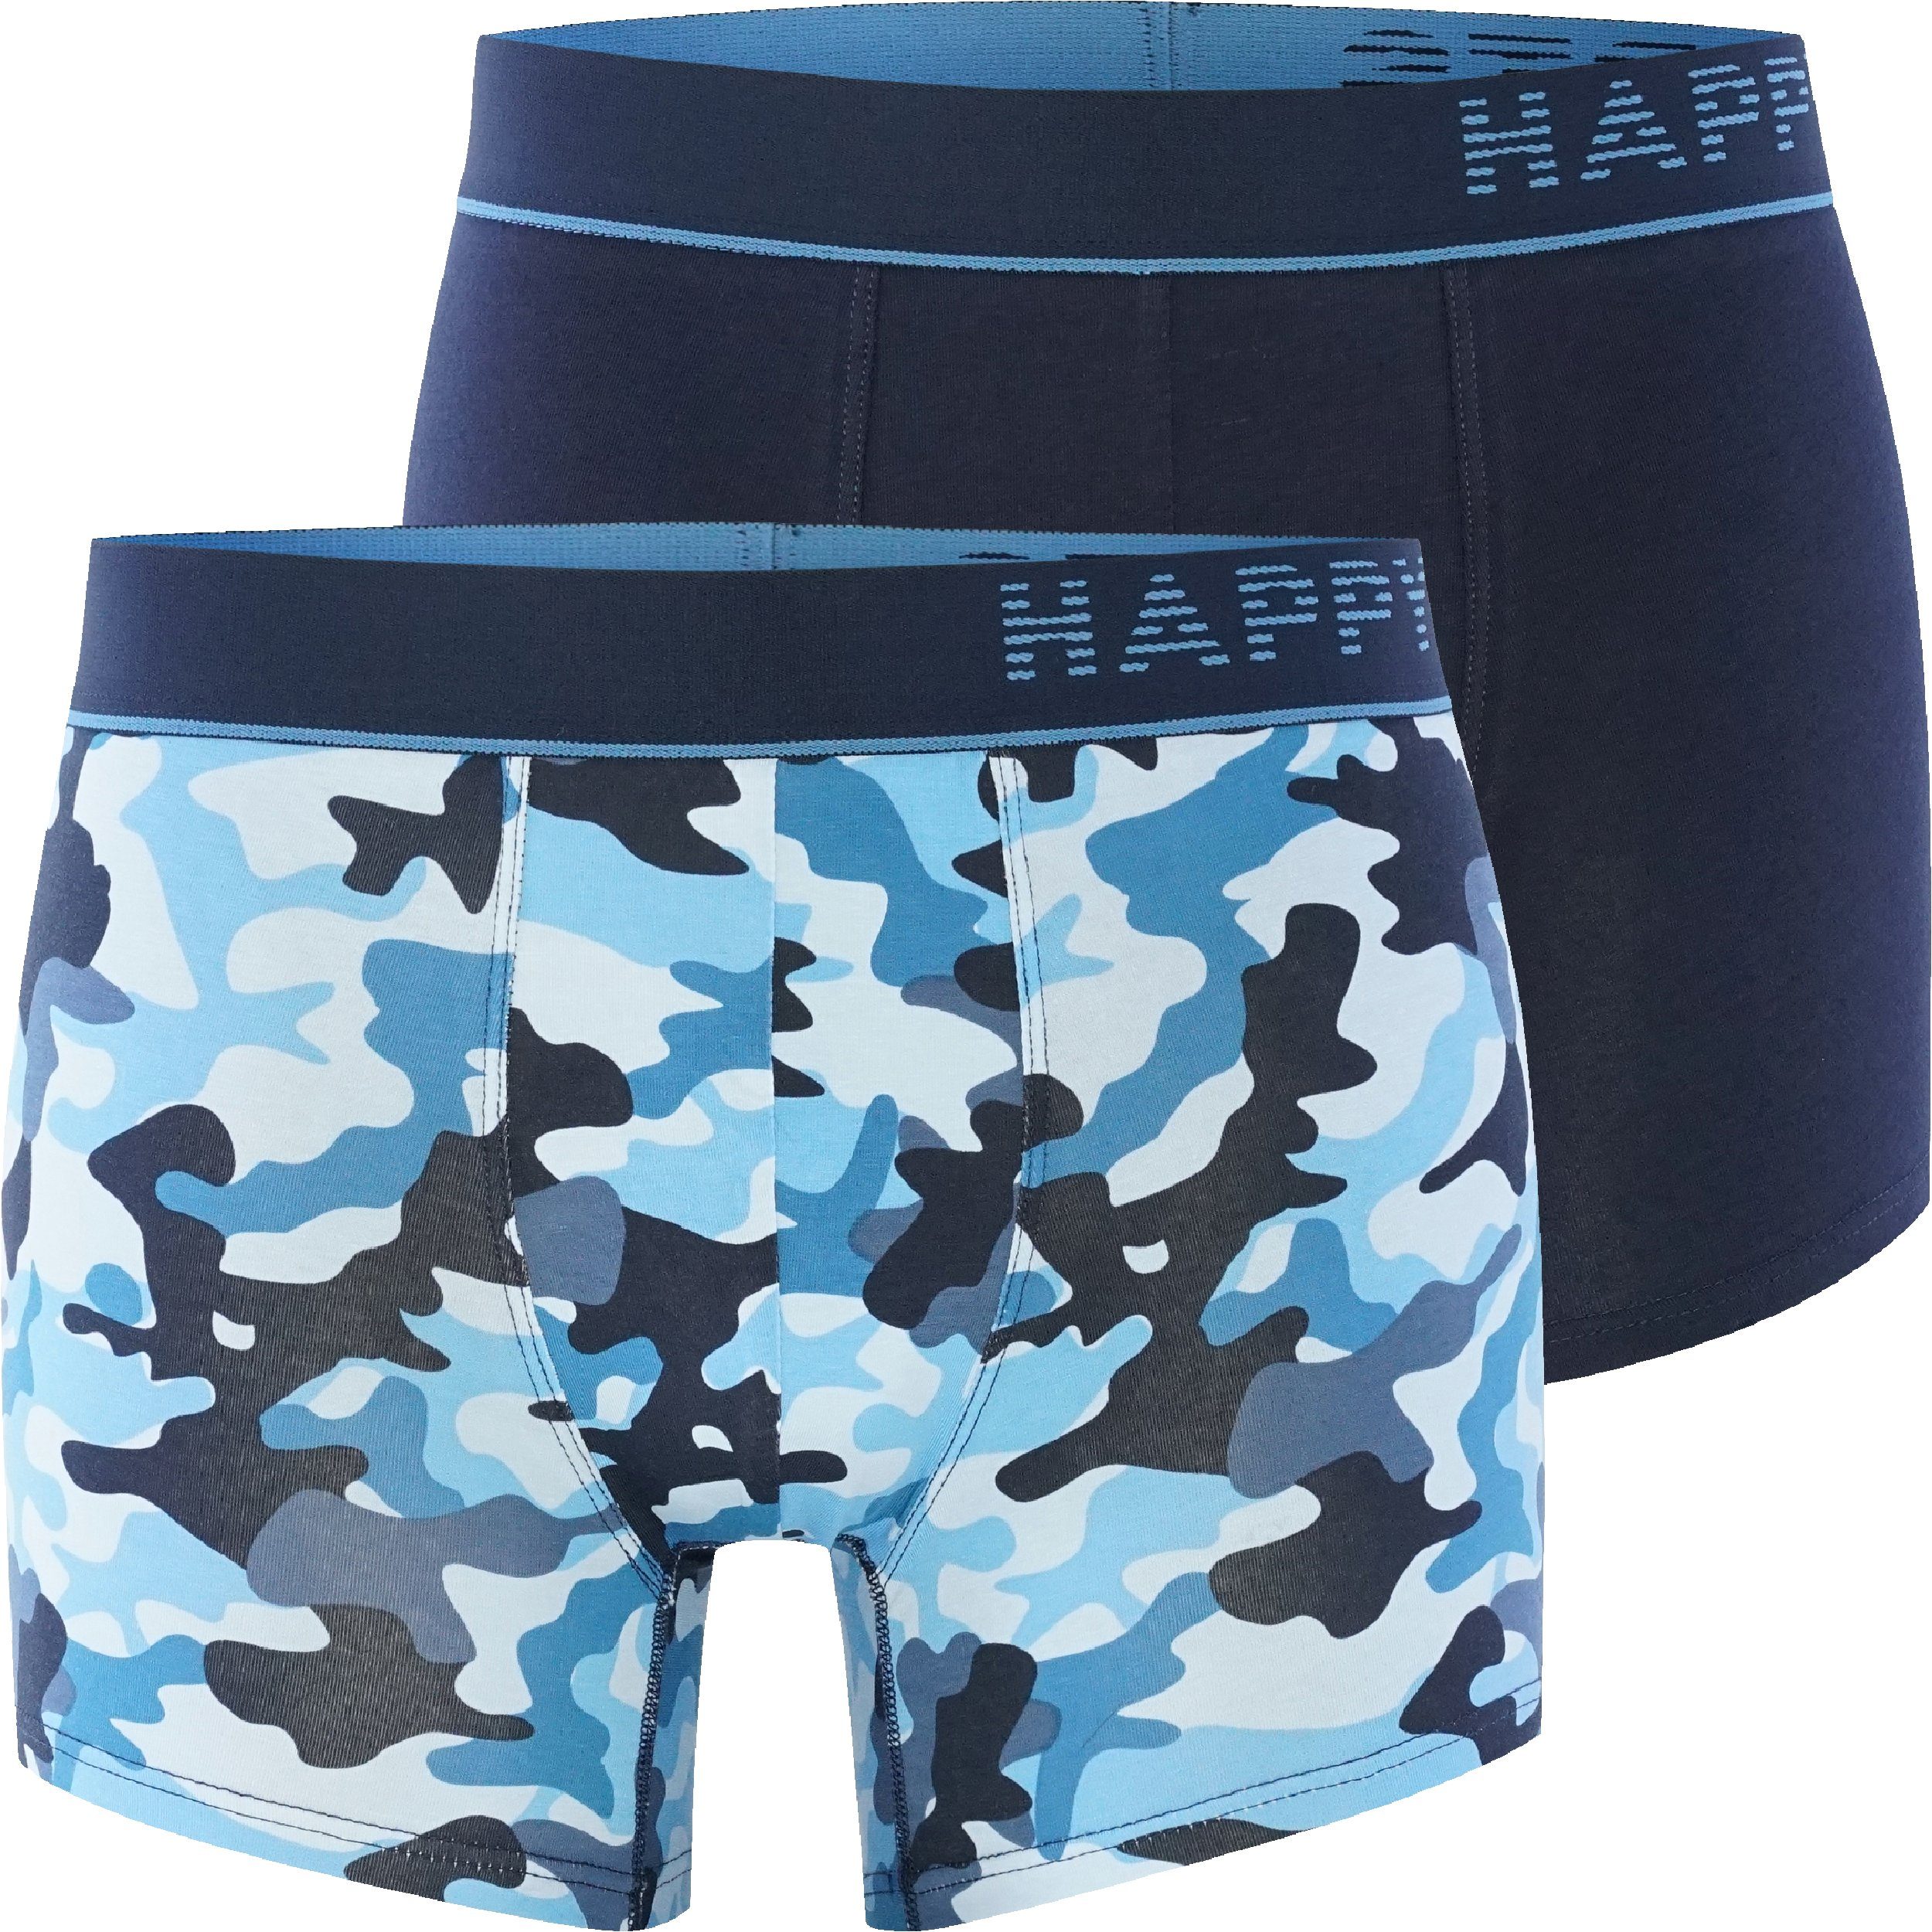 HAPPY SHORTS Retro Pants 2-Pack Camouflage